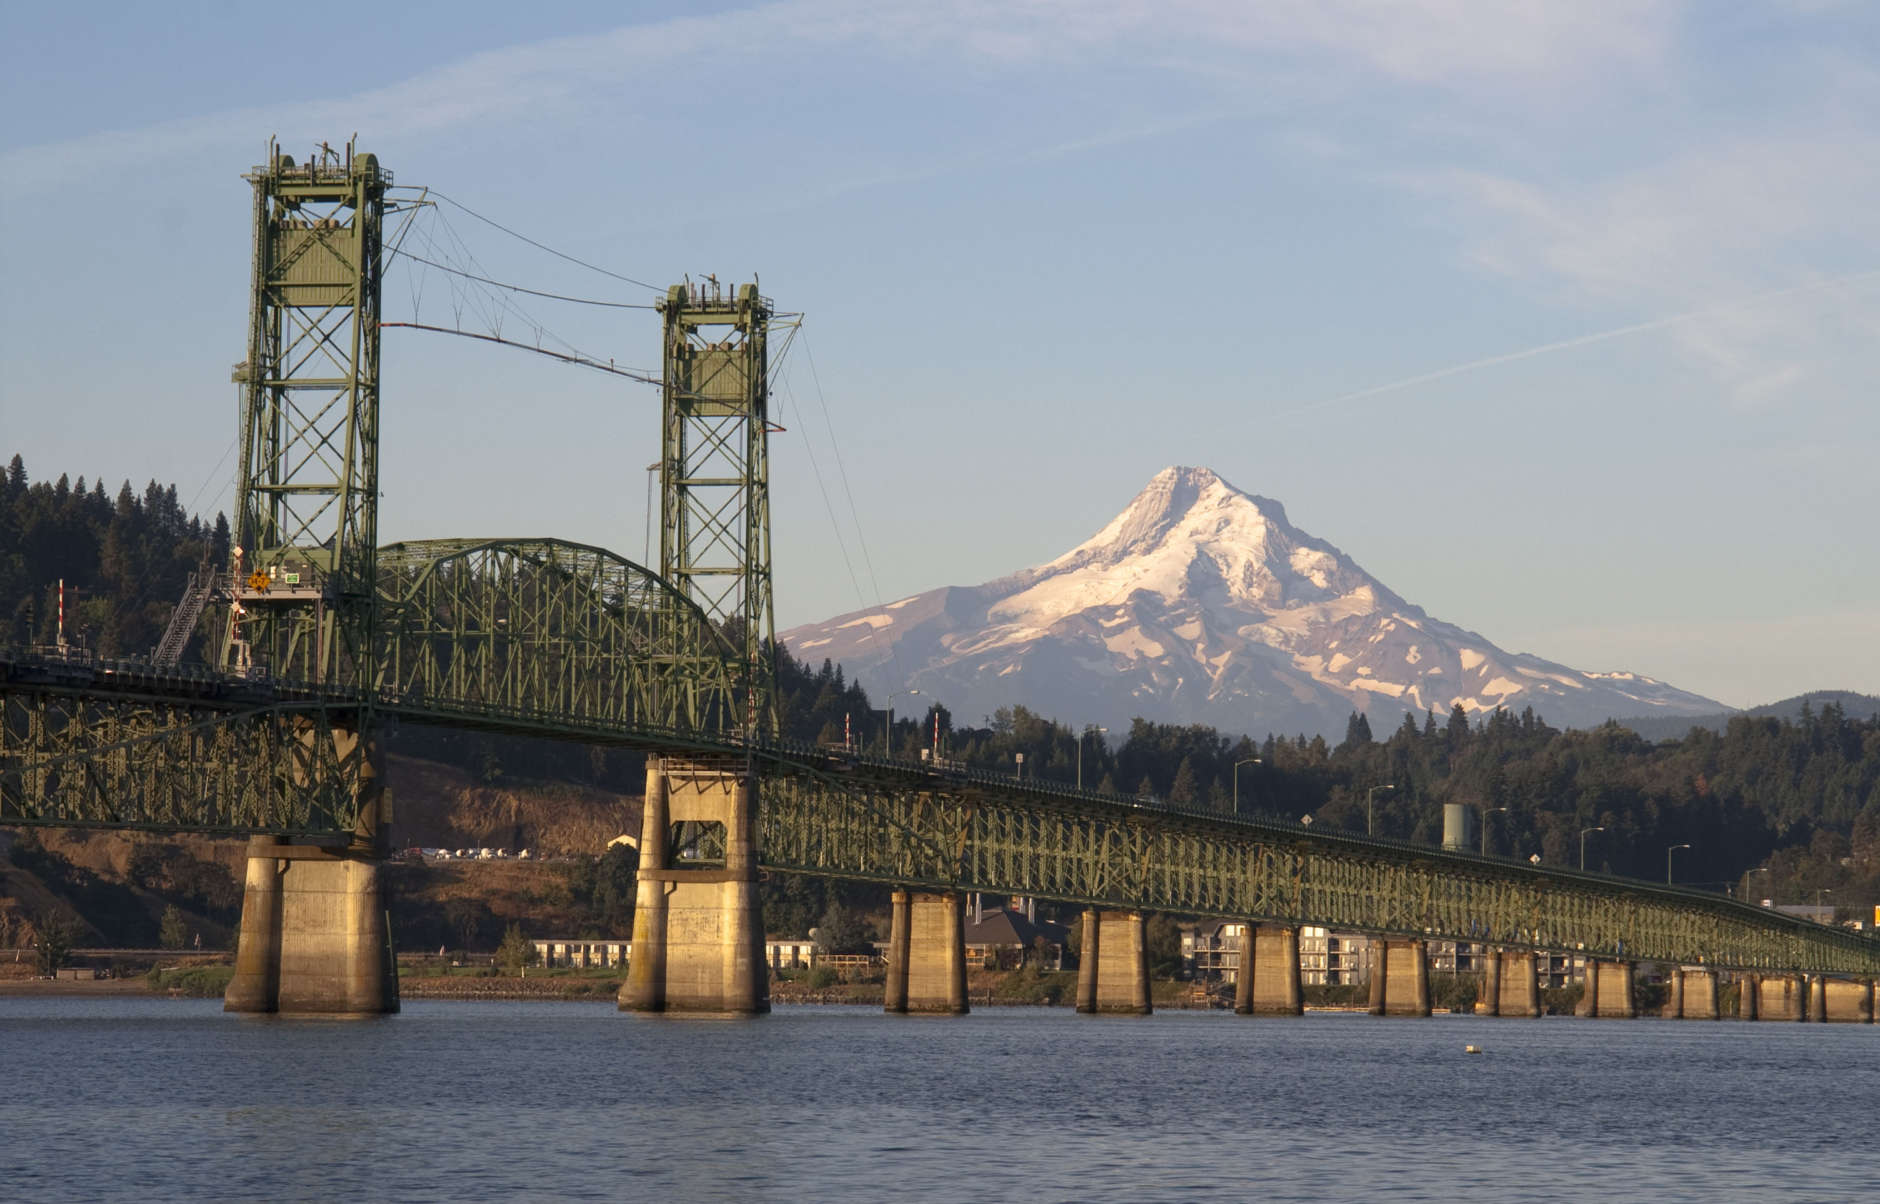 The draw bridge takes you across the Columbia River to Hood River Oregon in the Shadow of Mt Hood